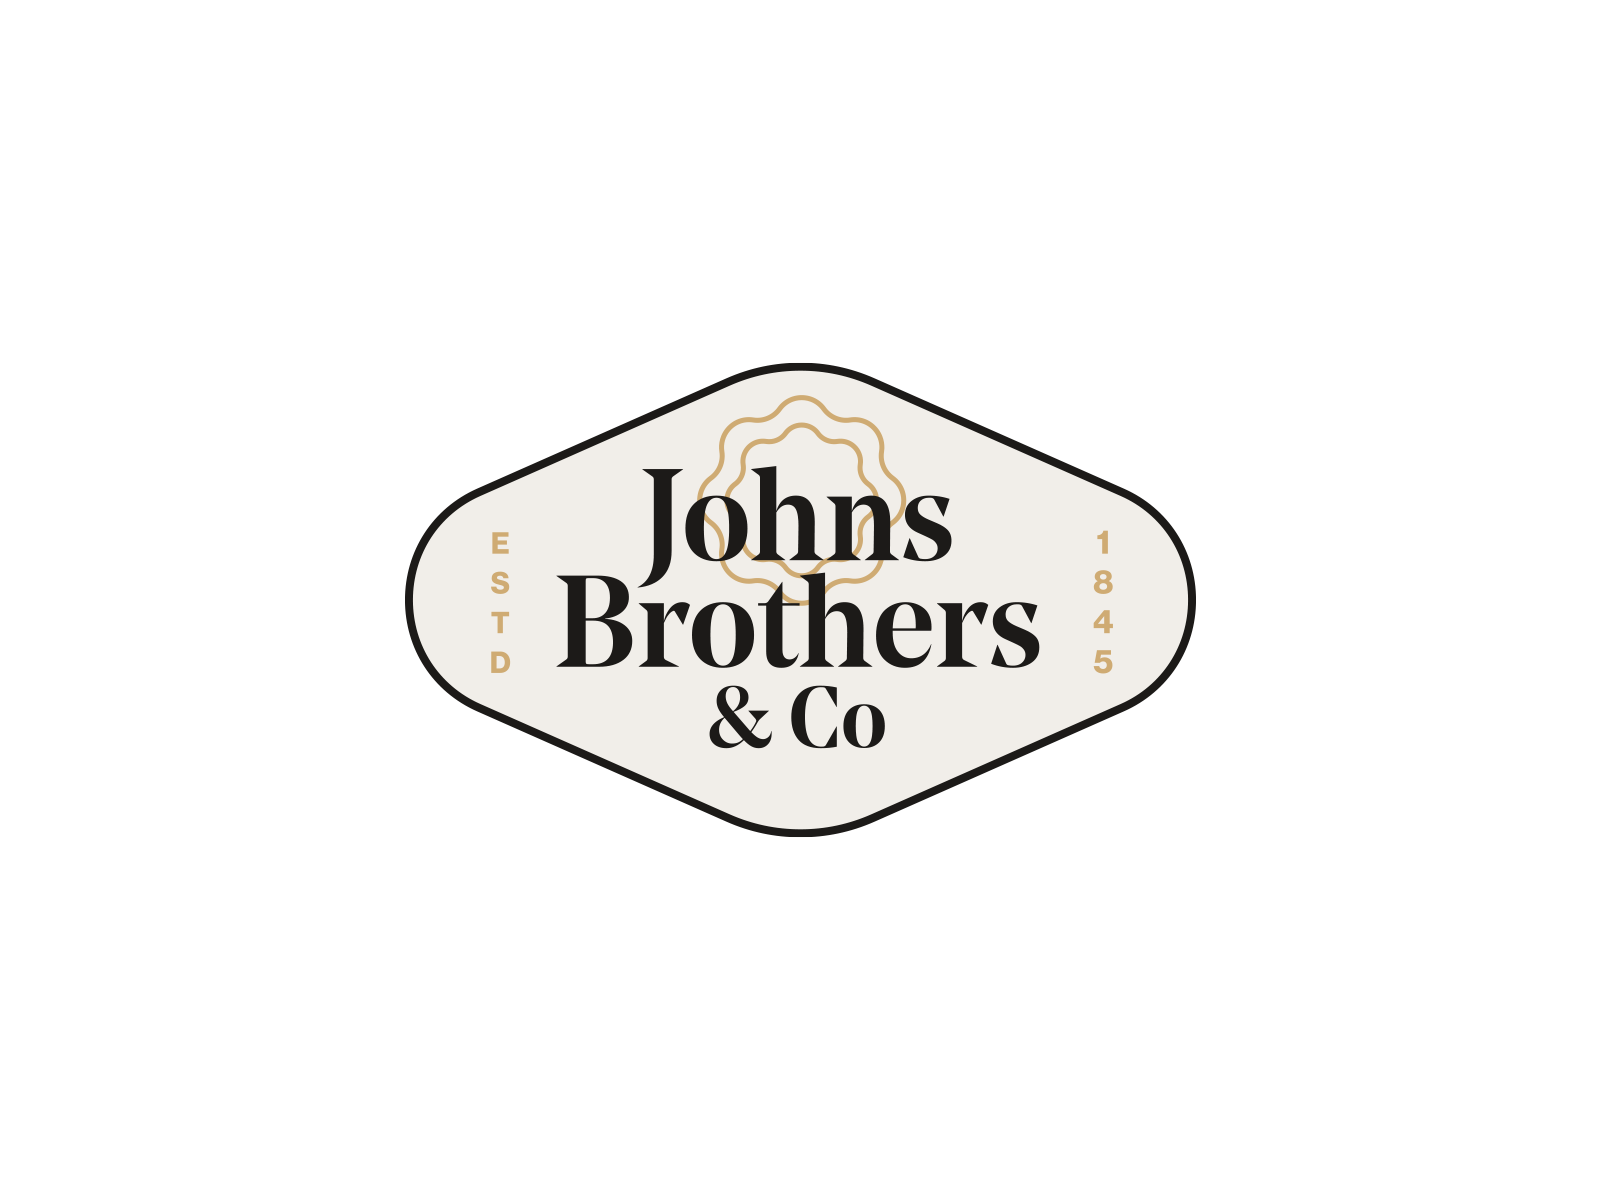 Johns Brothers by Stelian Vasile on Dribbble